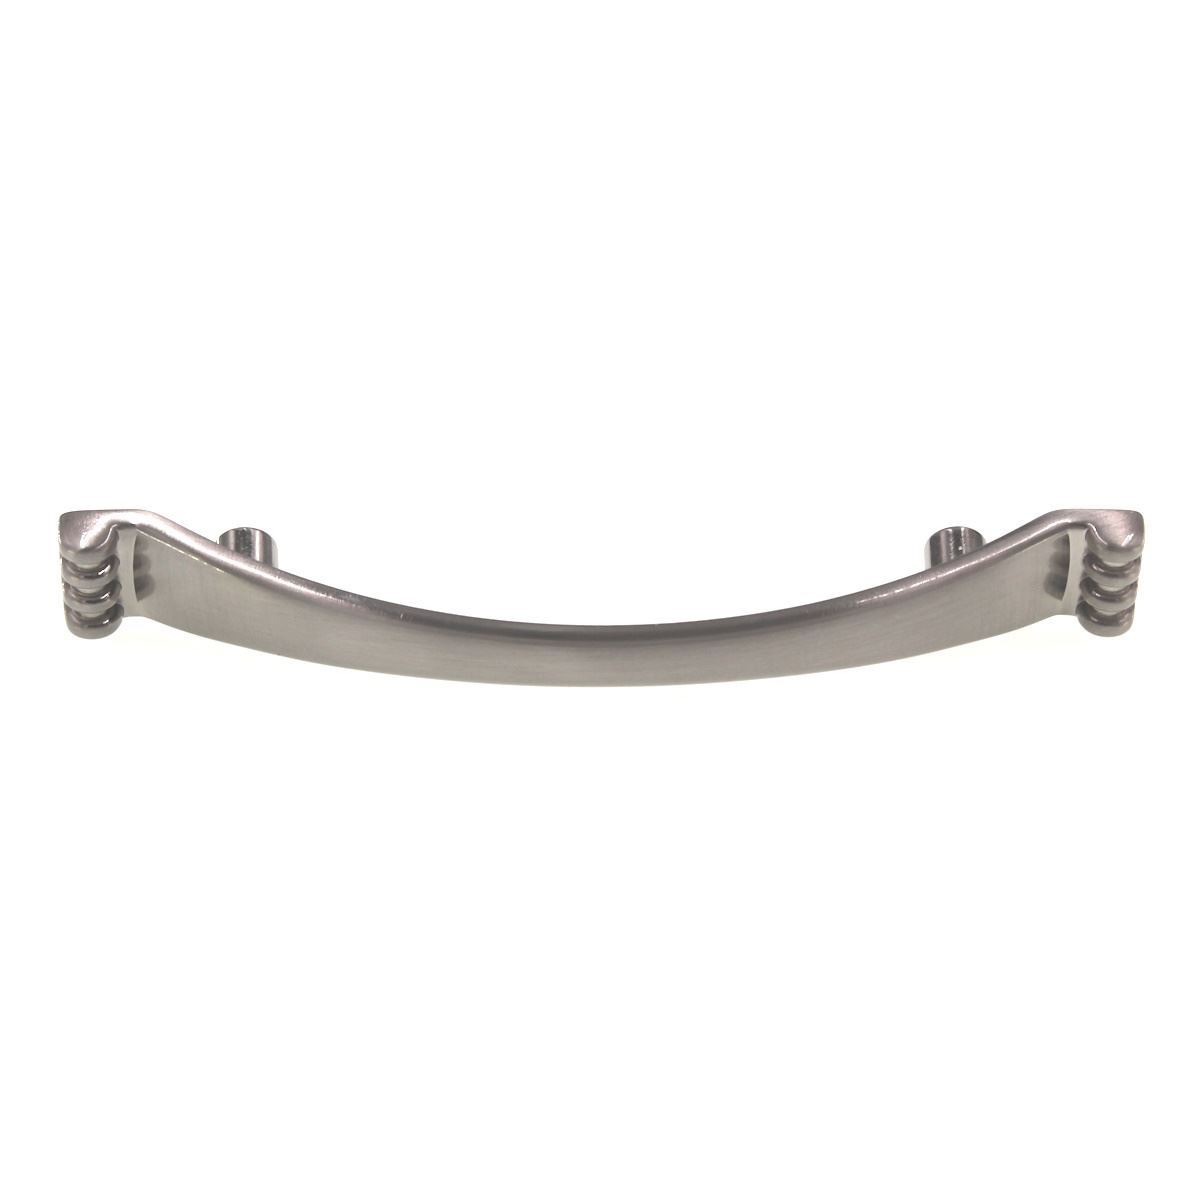 Hickory Hardware Conquest 3" Ctr Cabinet Arch Pull Satin Nickel P14461-SN